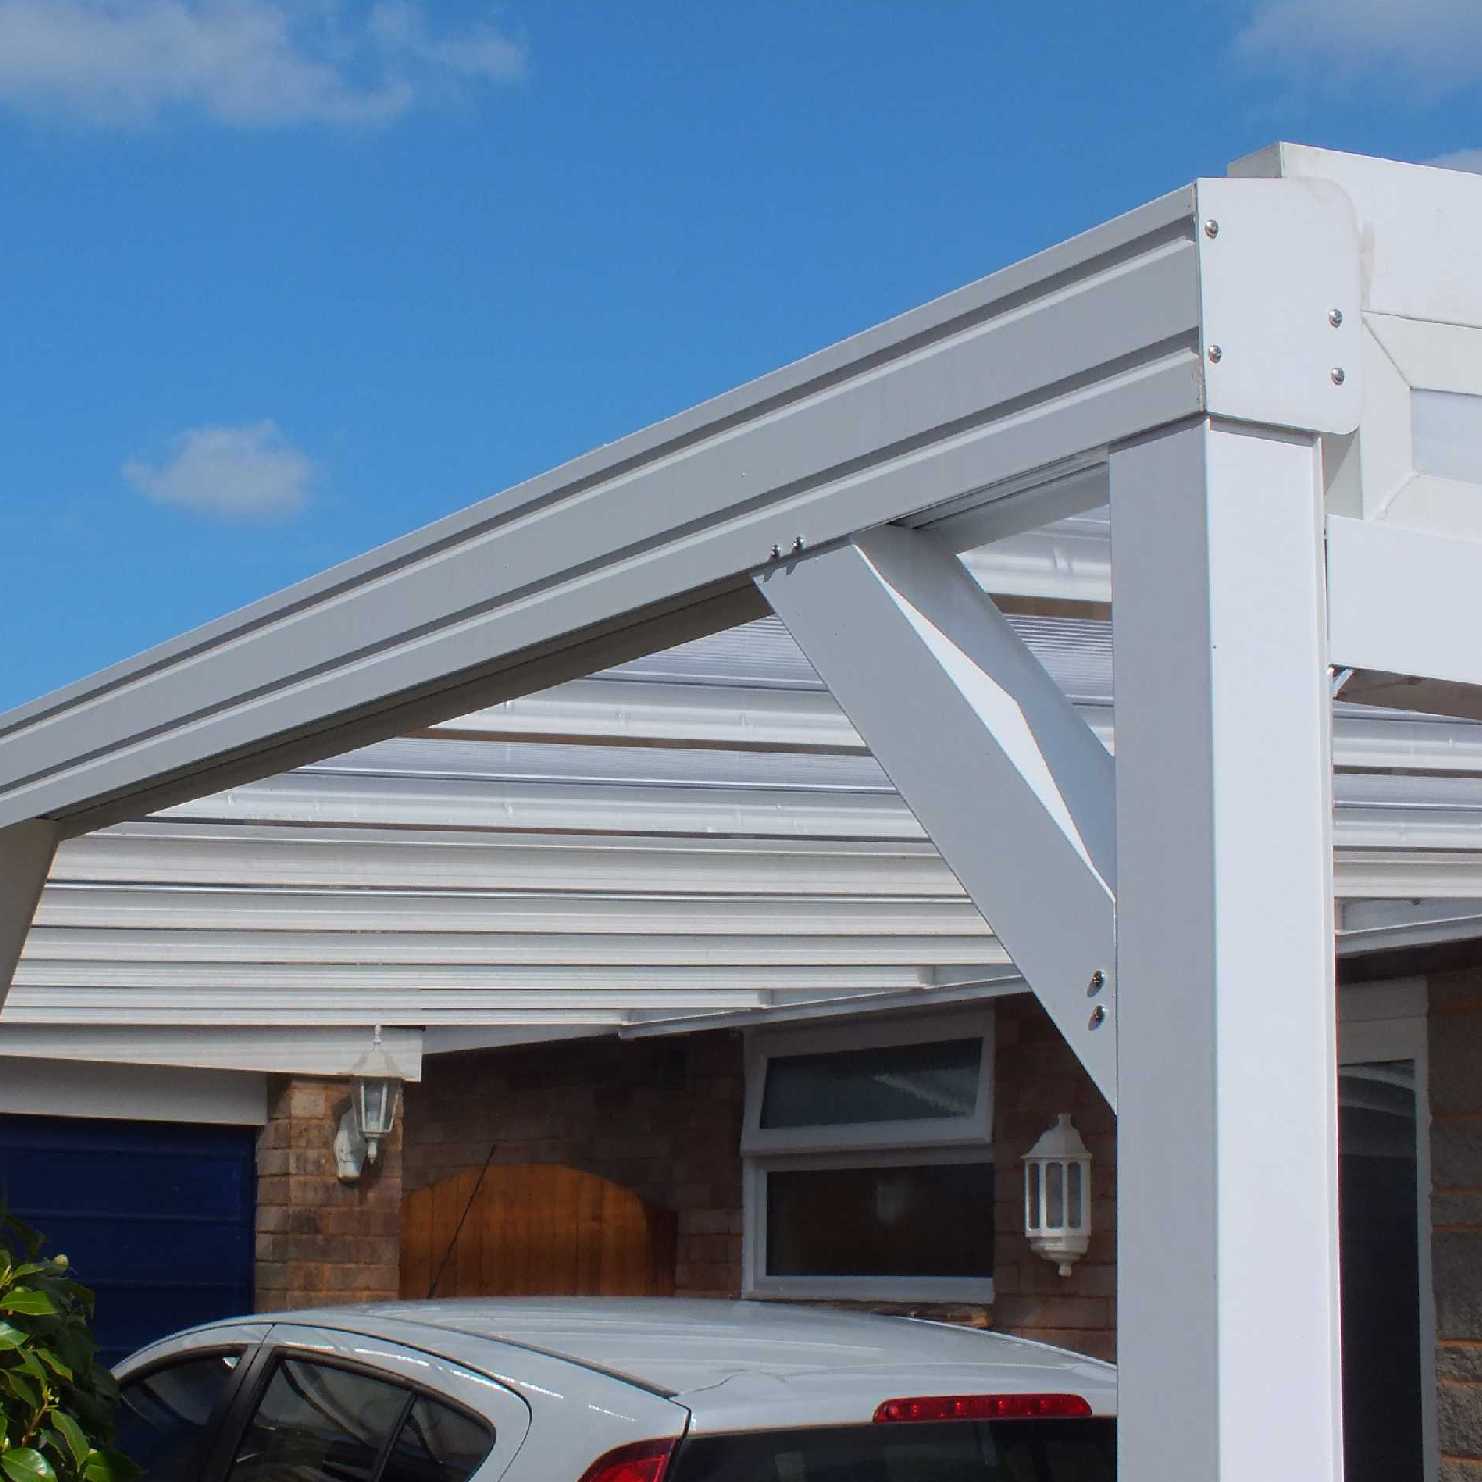 Great deals on Omega Smart Lean-To Canopy, White with 16mm Polycarbonate Glazing - 10.6m (W) x 2.0m (P), (5) Supporting Posts